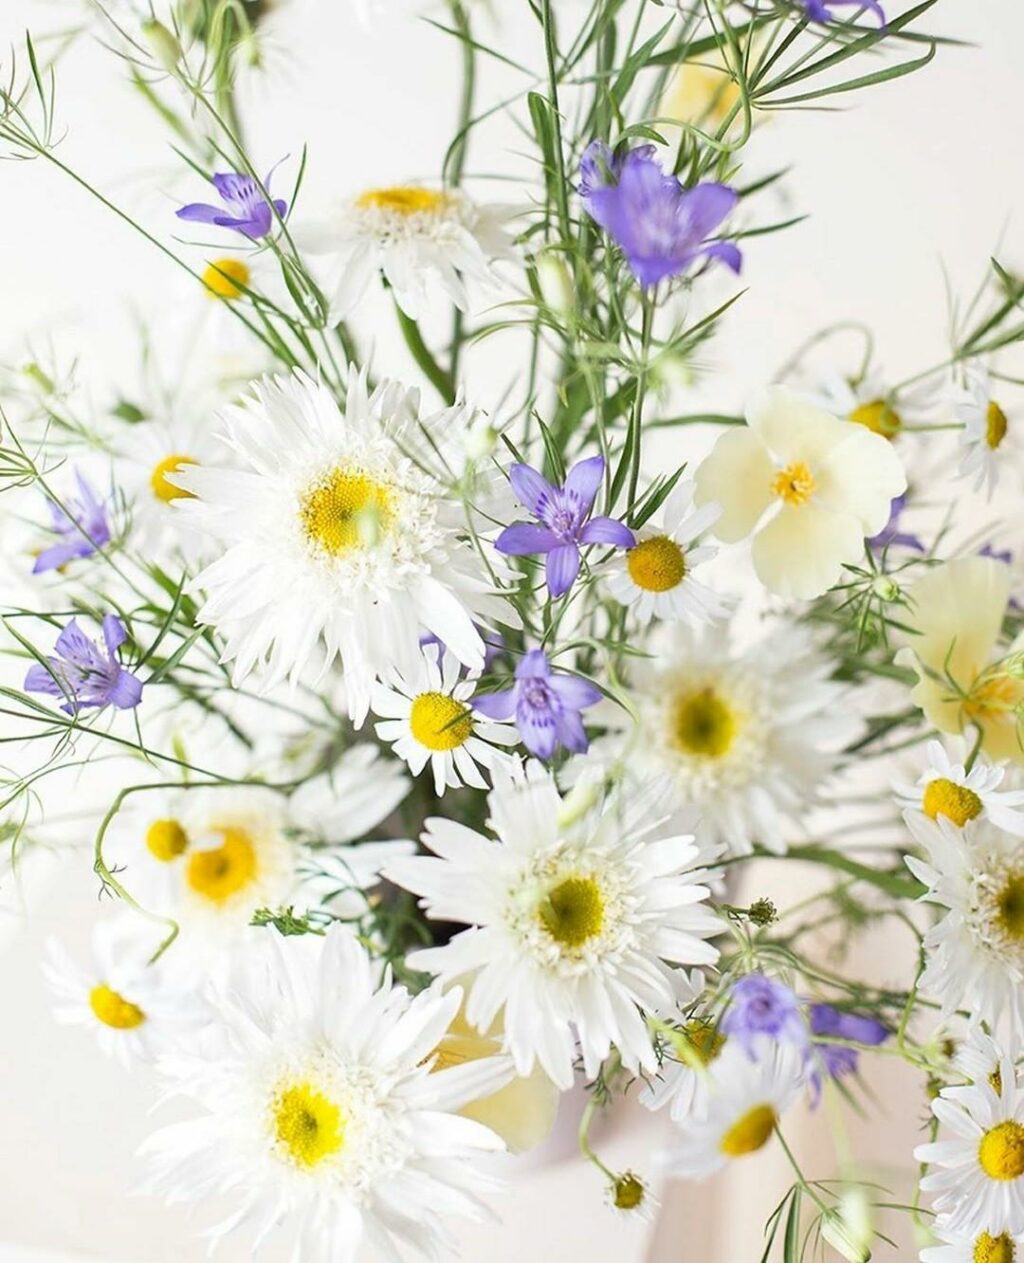 white daisies and violet harebells by Aesme Studios